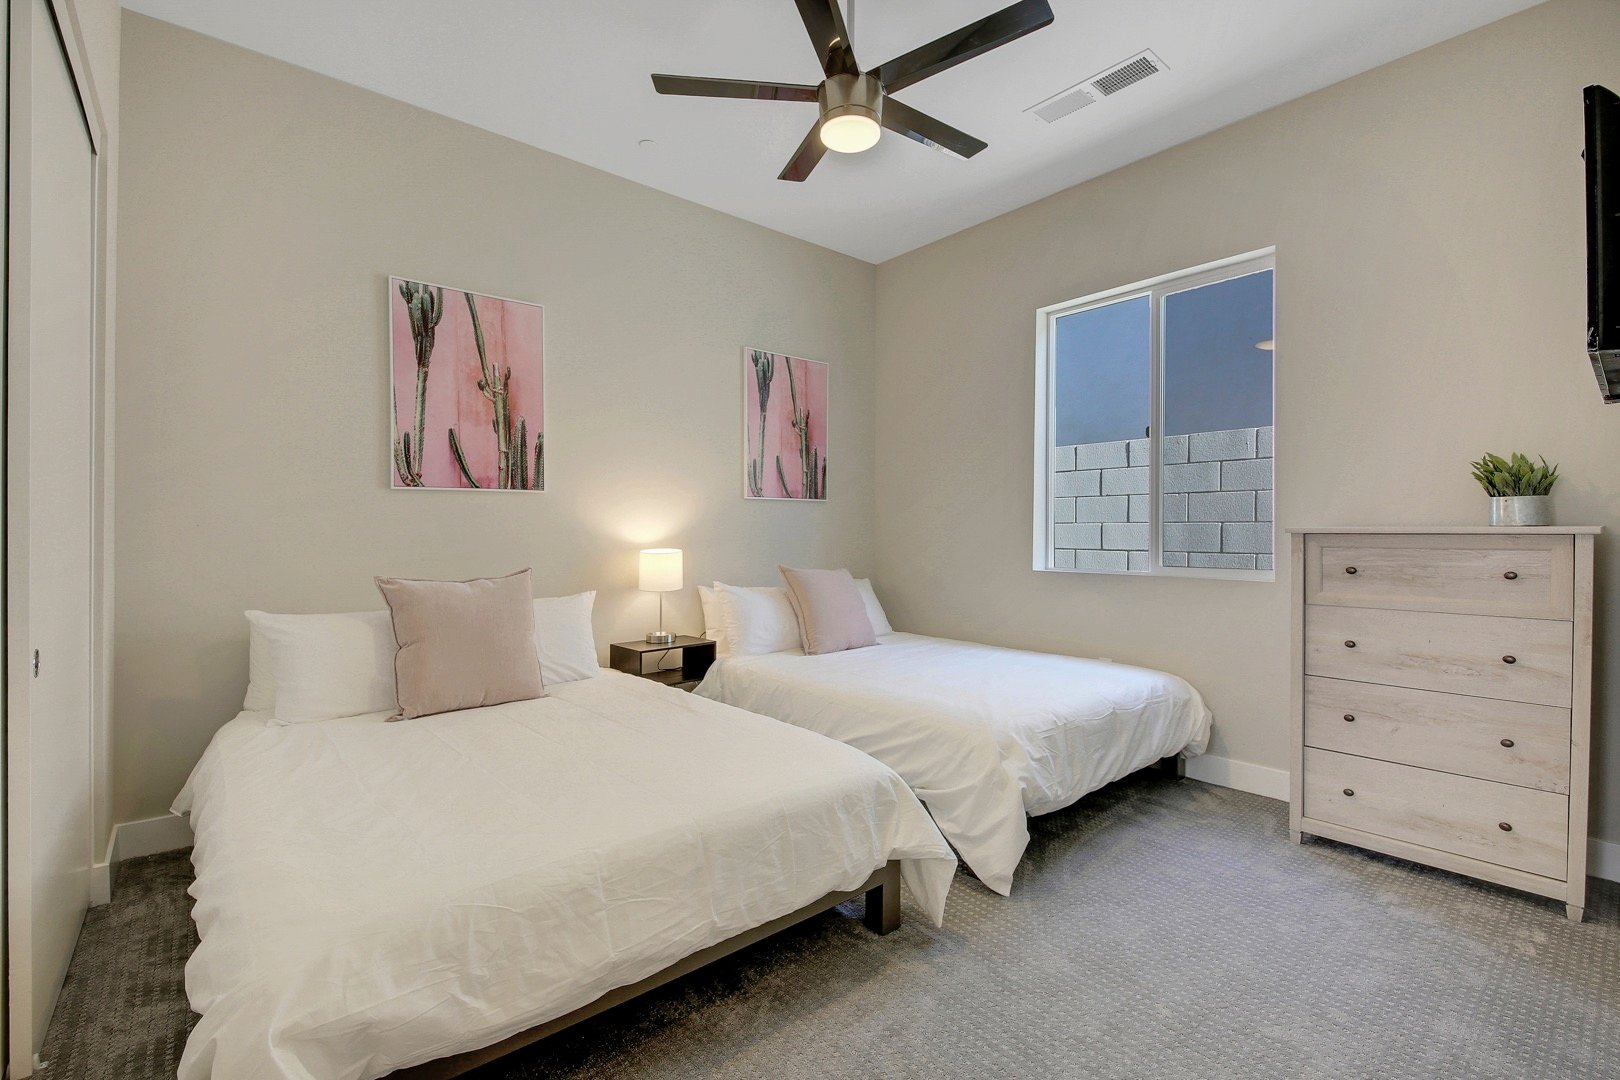 Bedroom 2 is located next to the Master Suite and features two Queen-sized Beds, 32-inch Insignia Fire-TV Smart television, and access to the hallway bathroom.